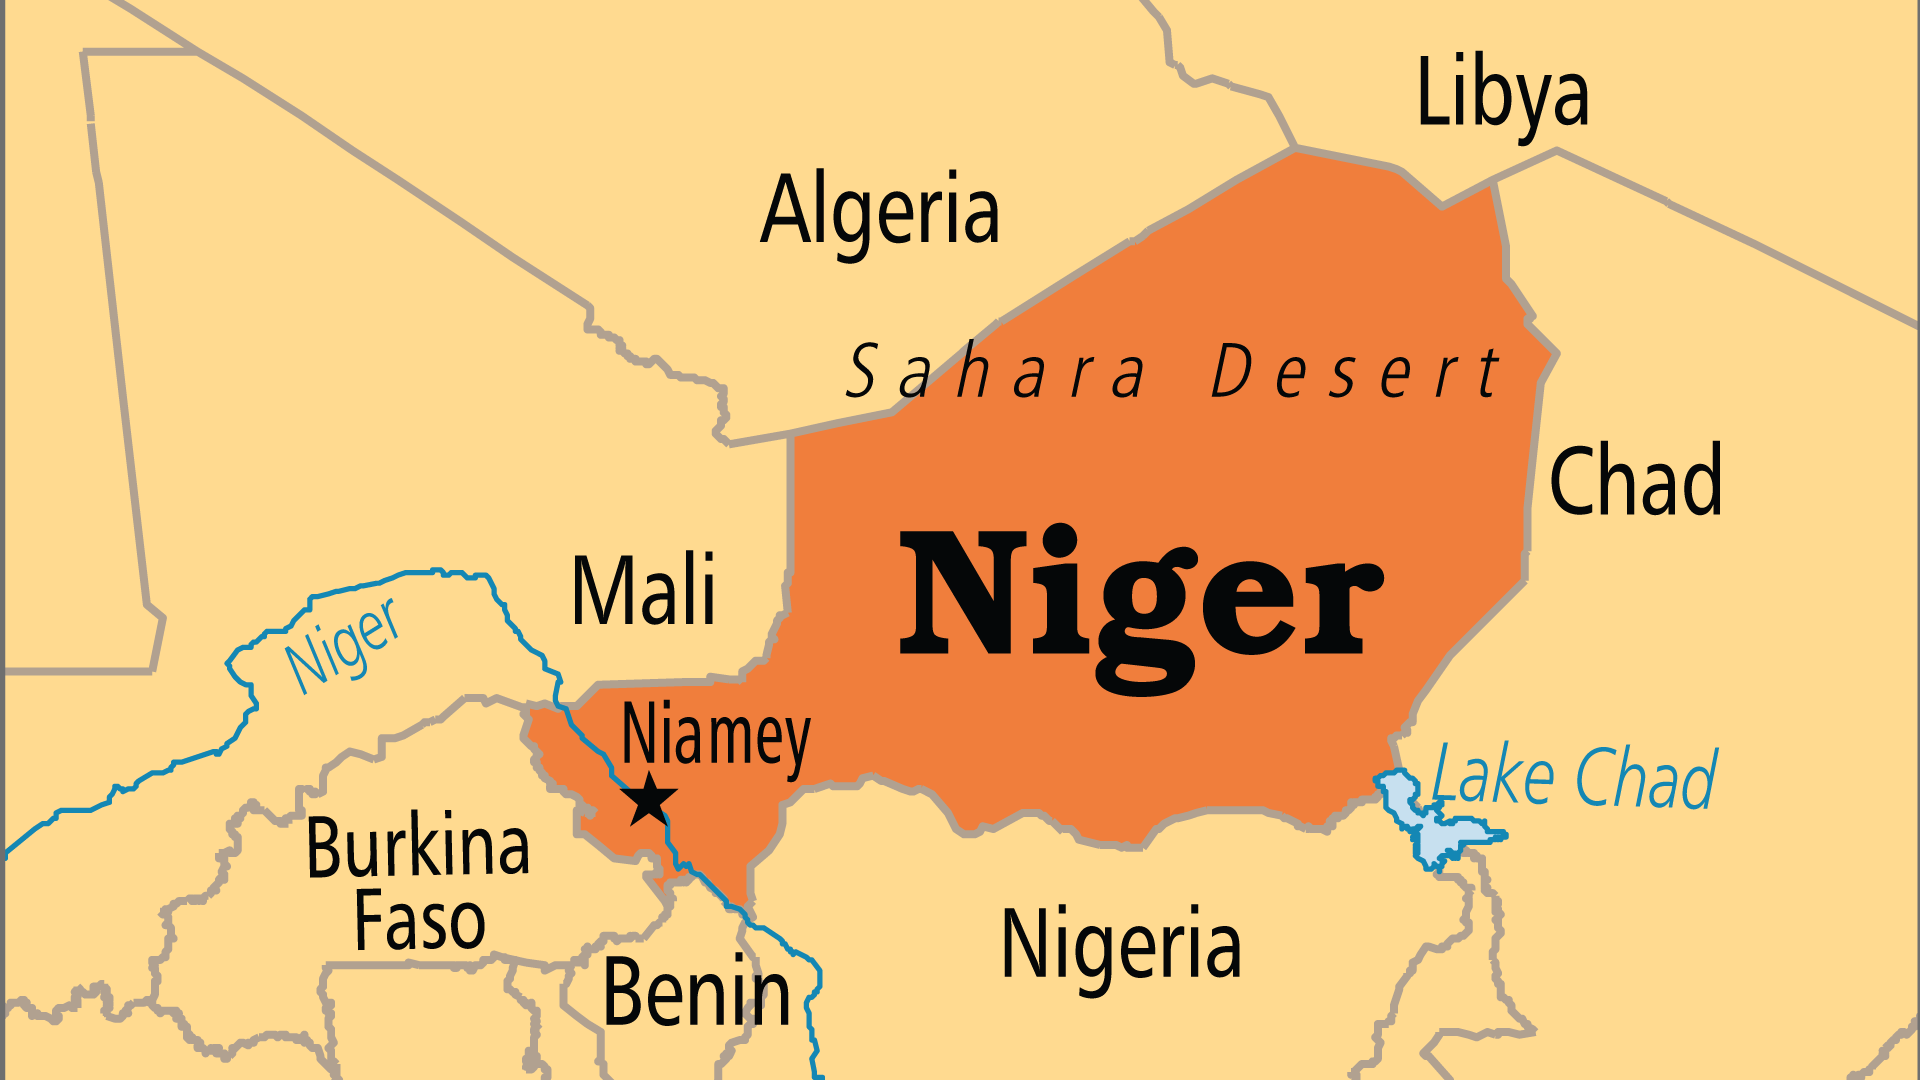 Only a legitimate government can cut ties with us - France tells Niger Republic